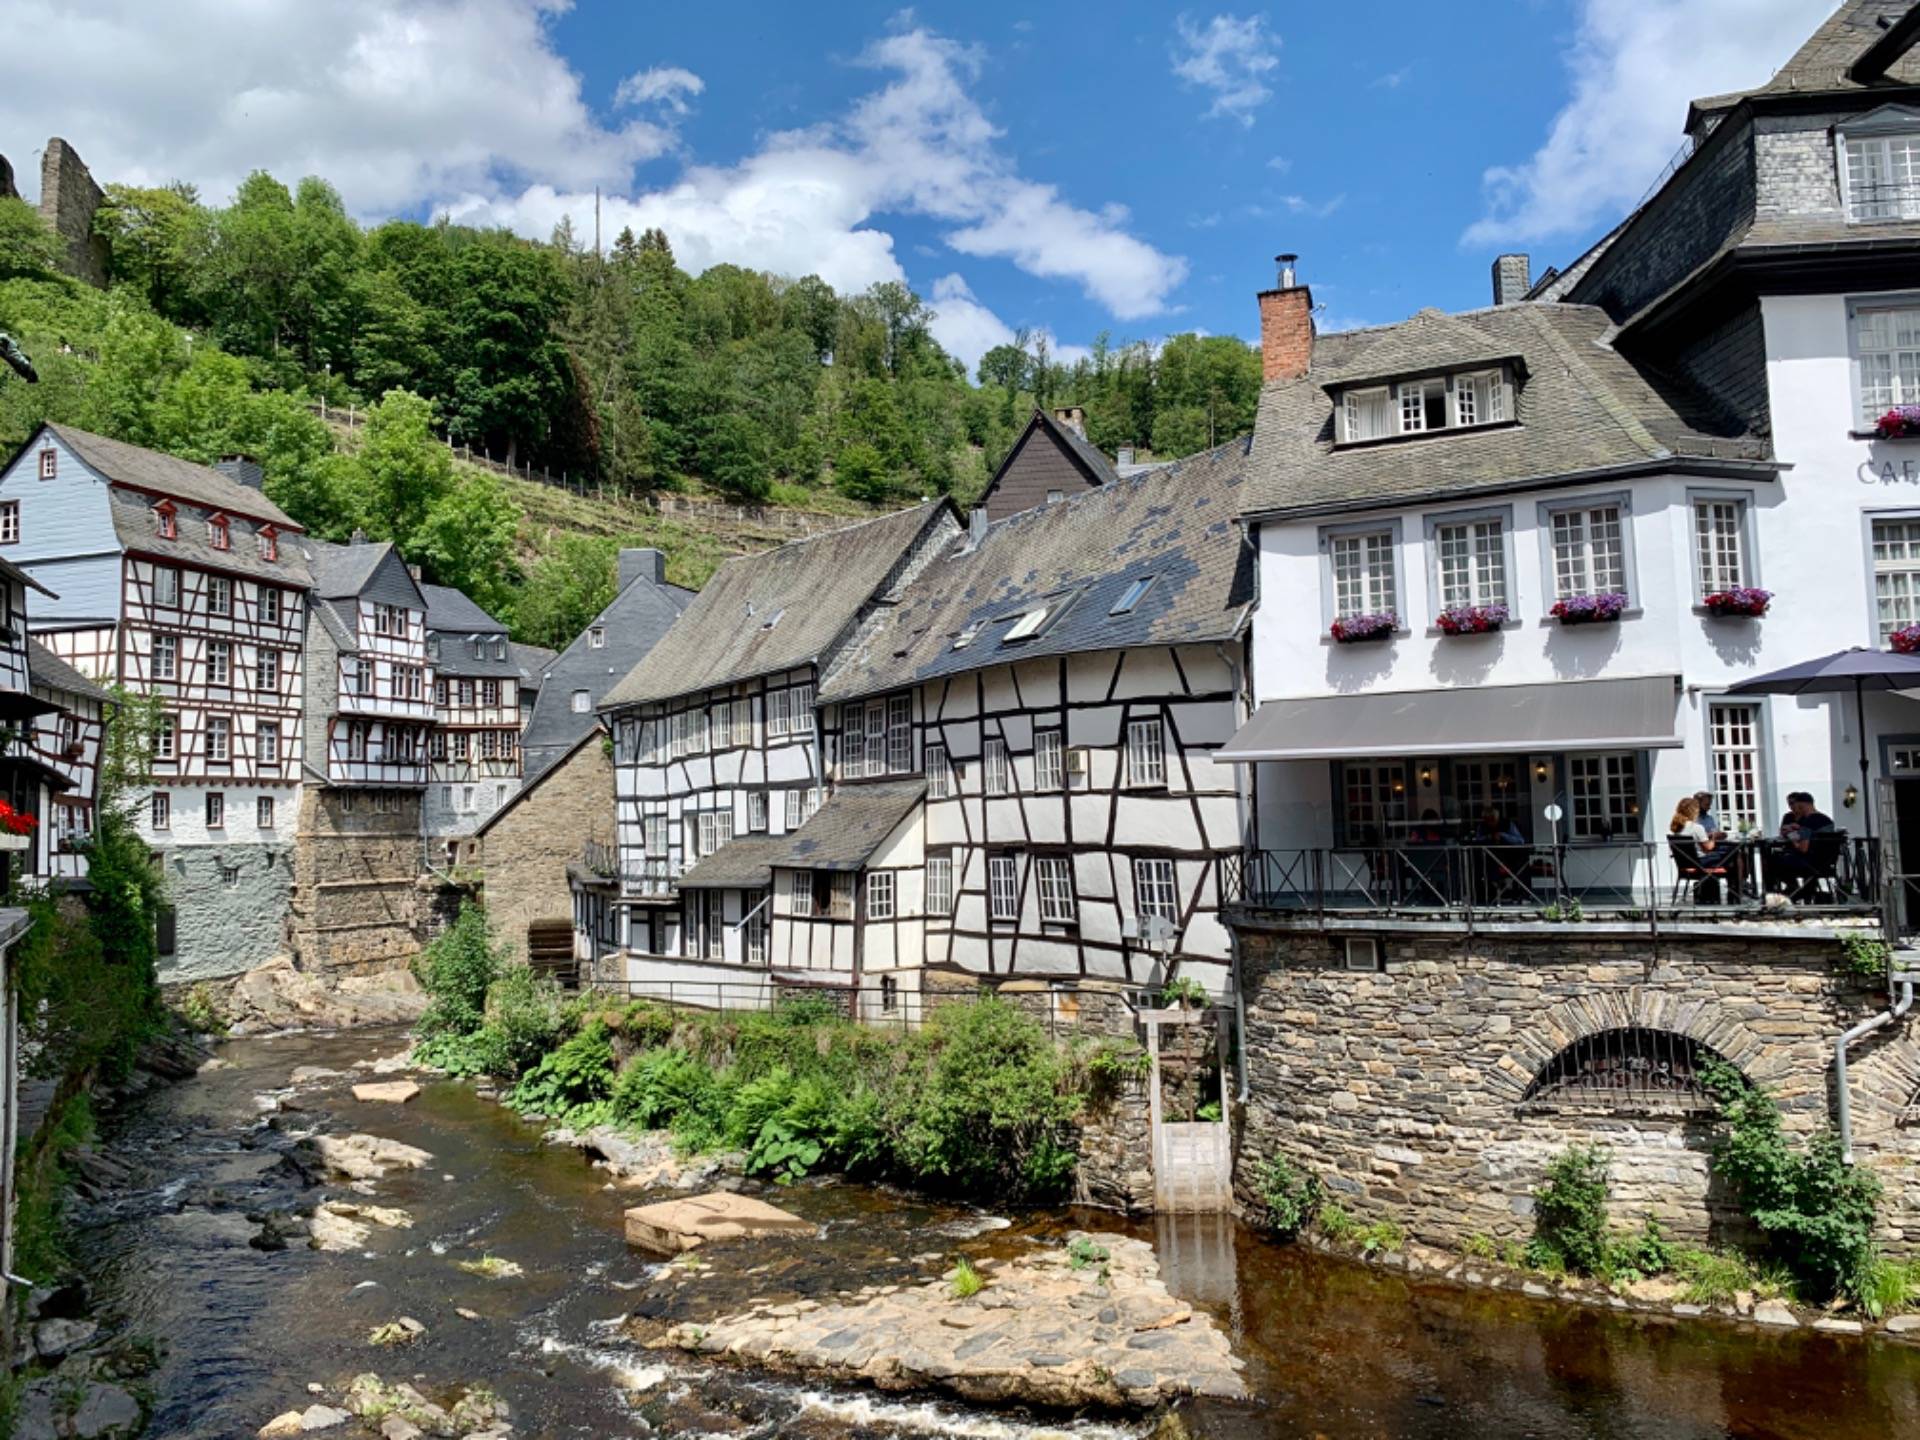 Monschau - A historic old‘n‘nice looking city